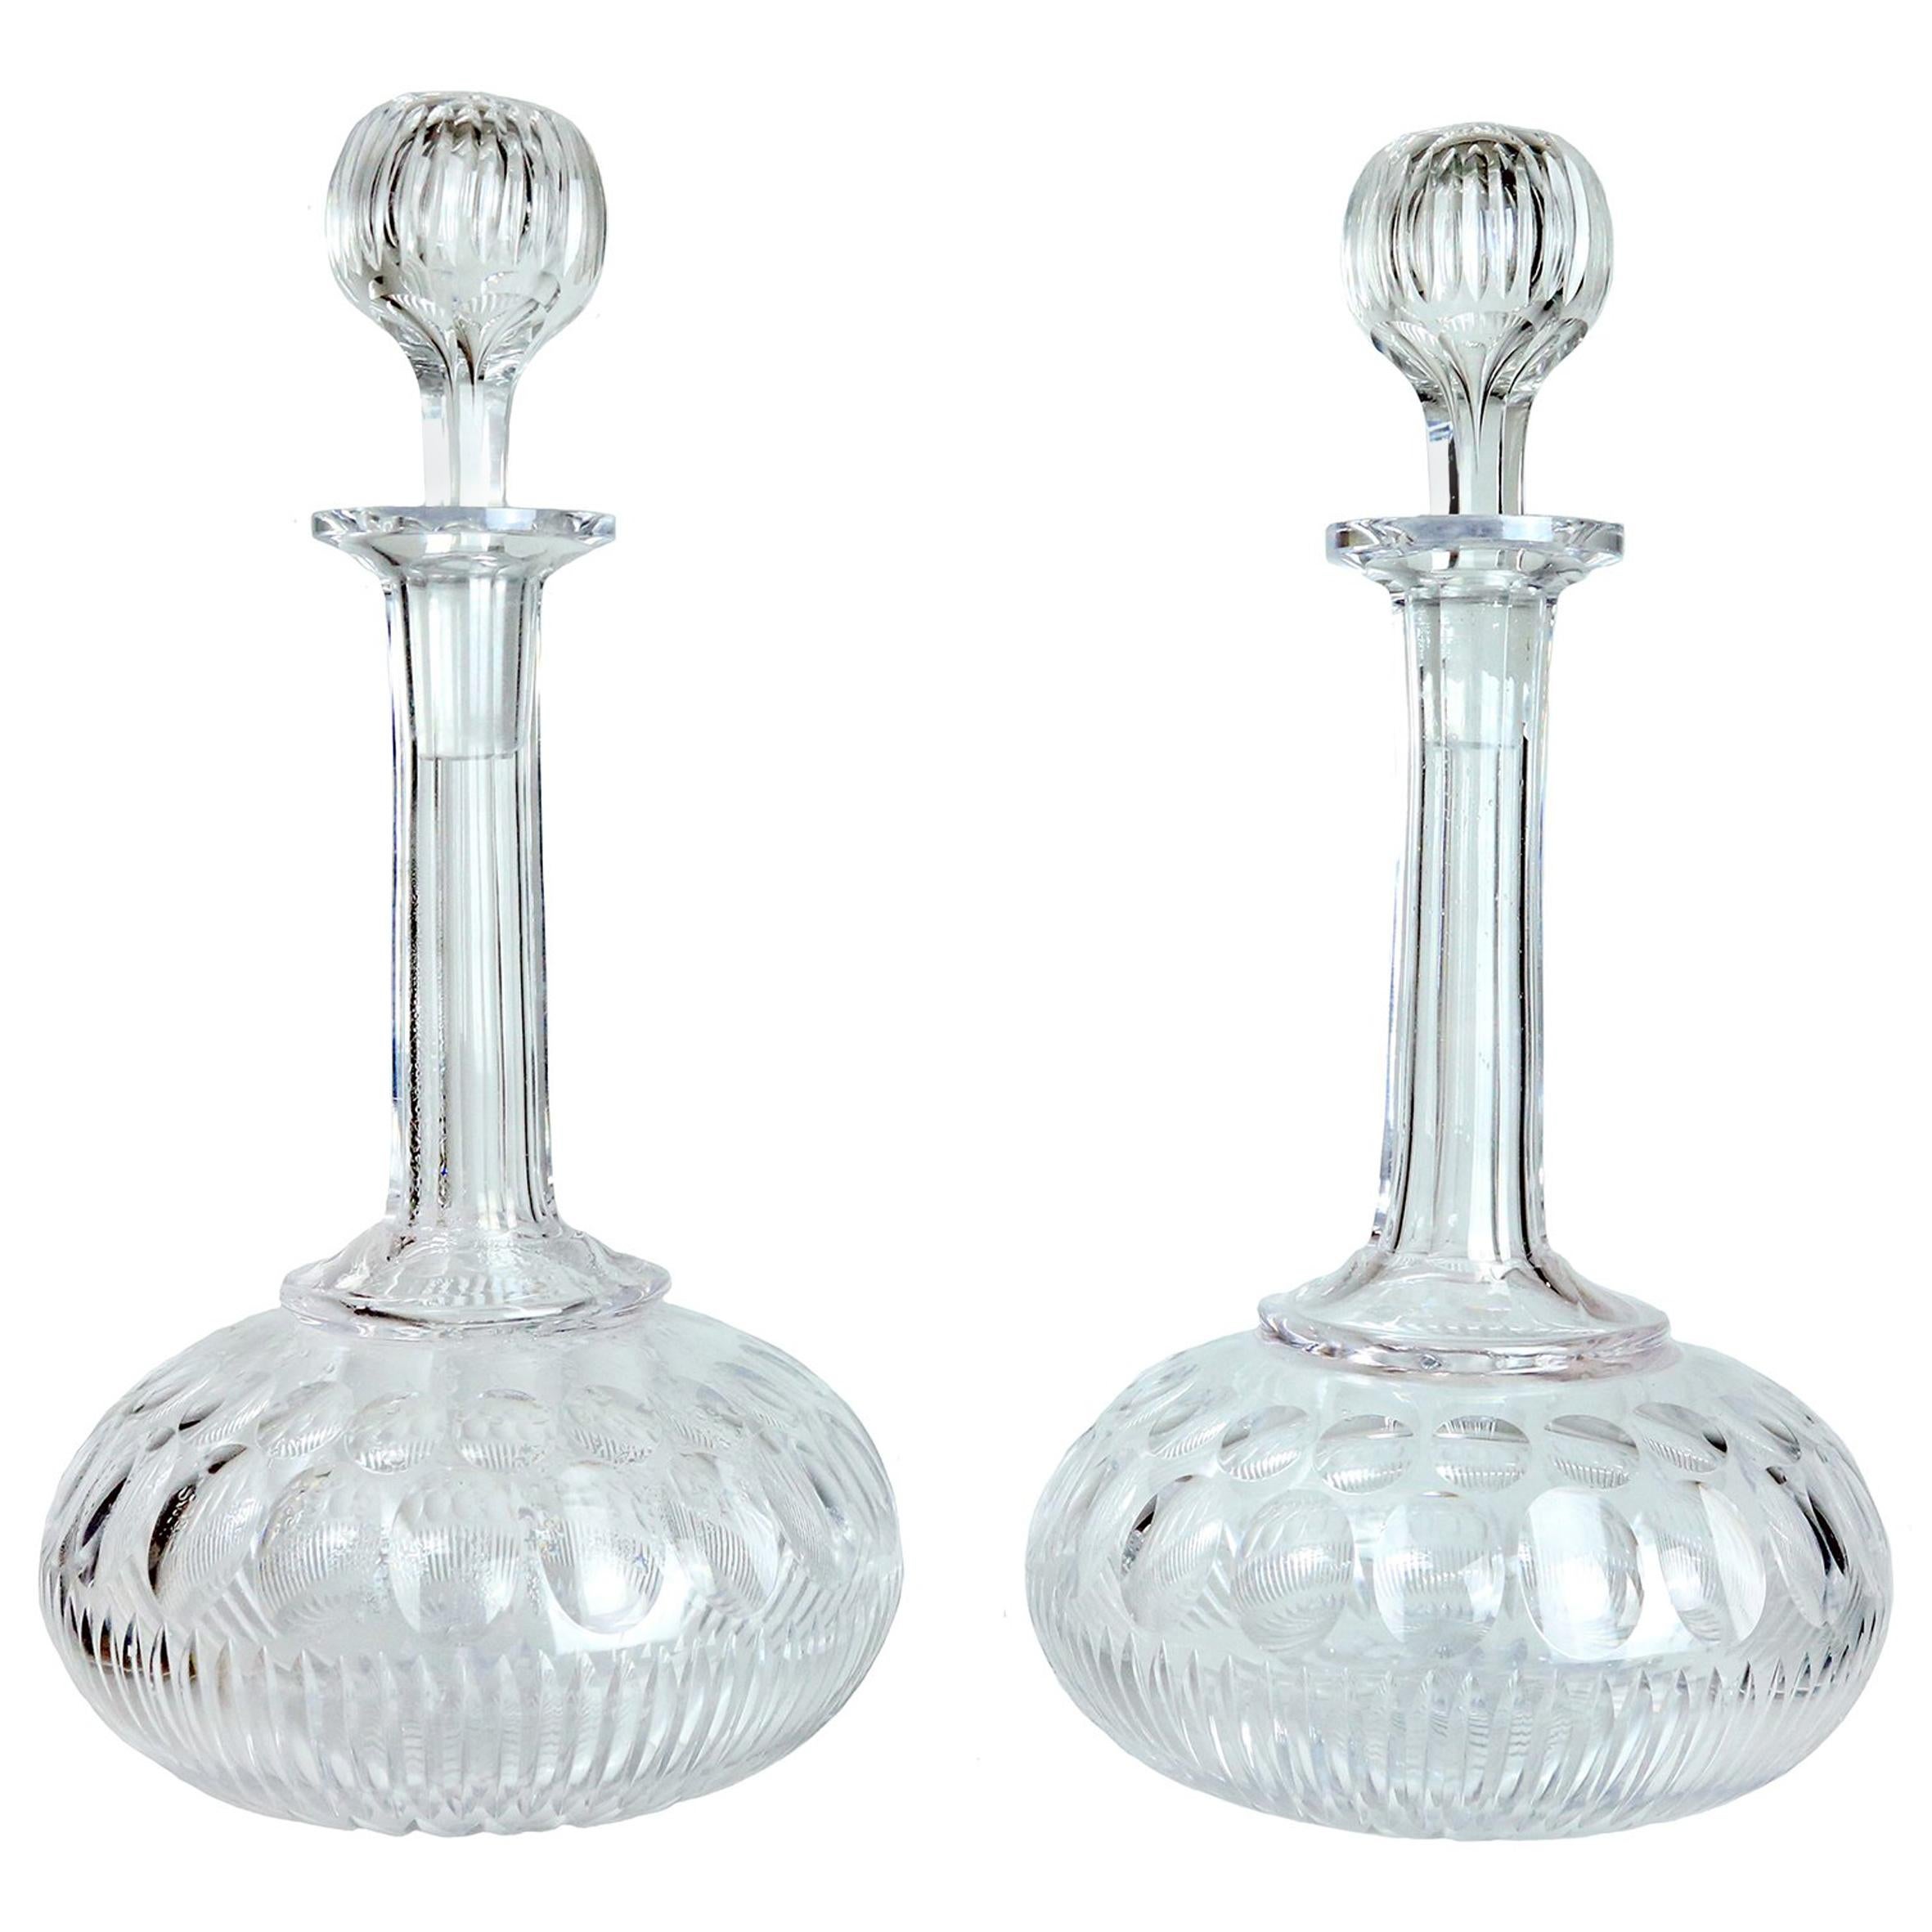 Pair of 19th Century Glass Decanters